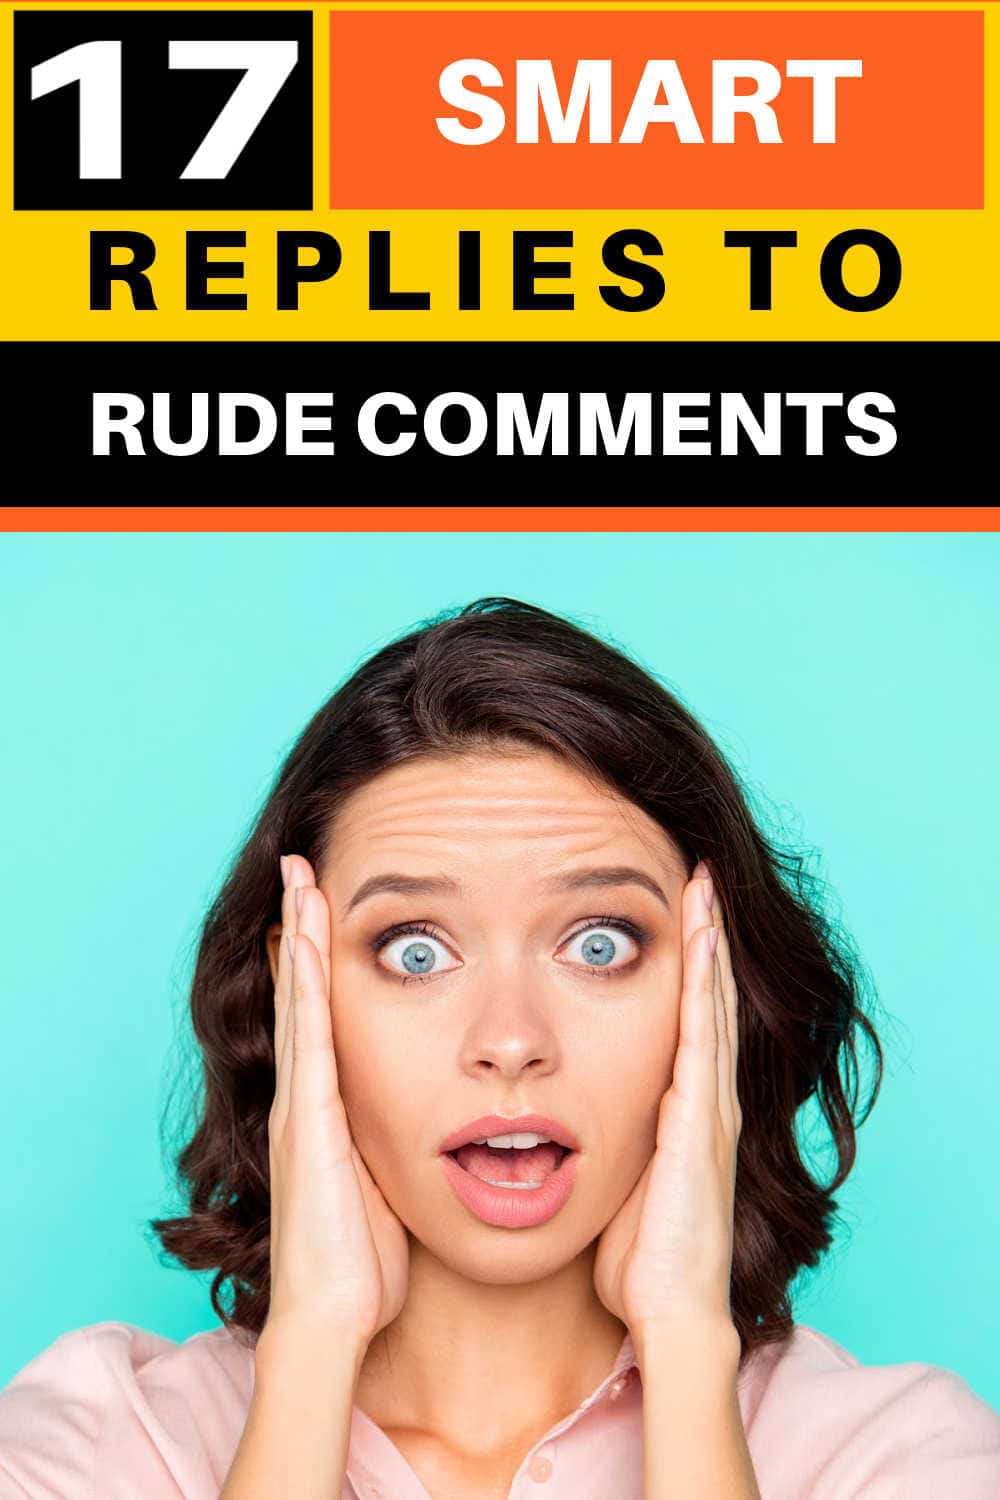 17 smart replies to rude comments